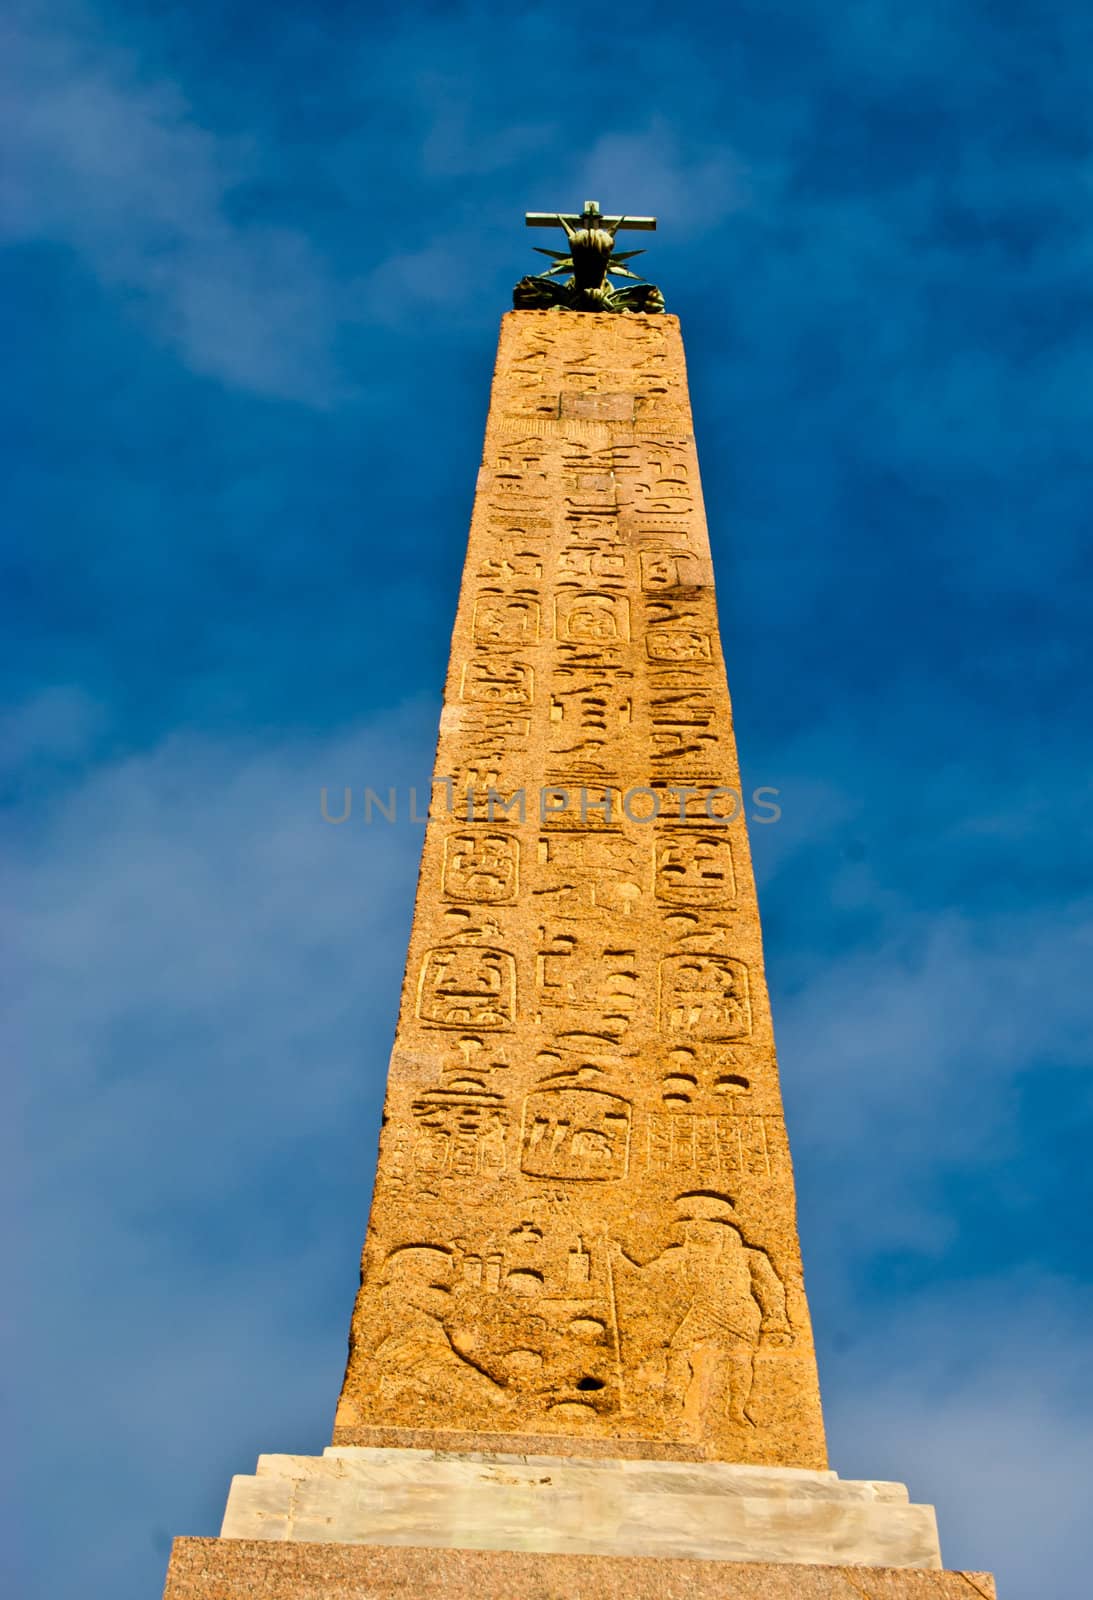 egyptian obelisk against a cloudy sky in Rome